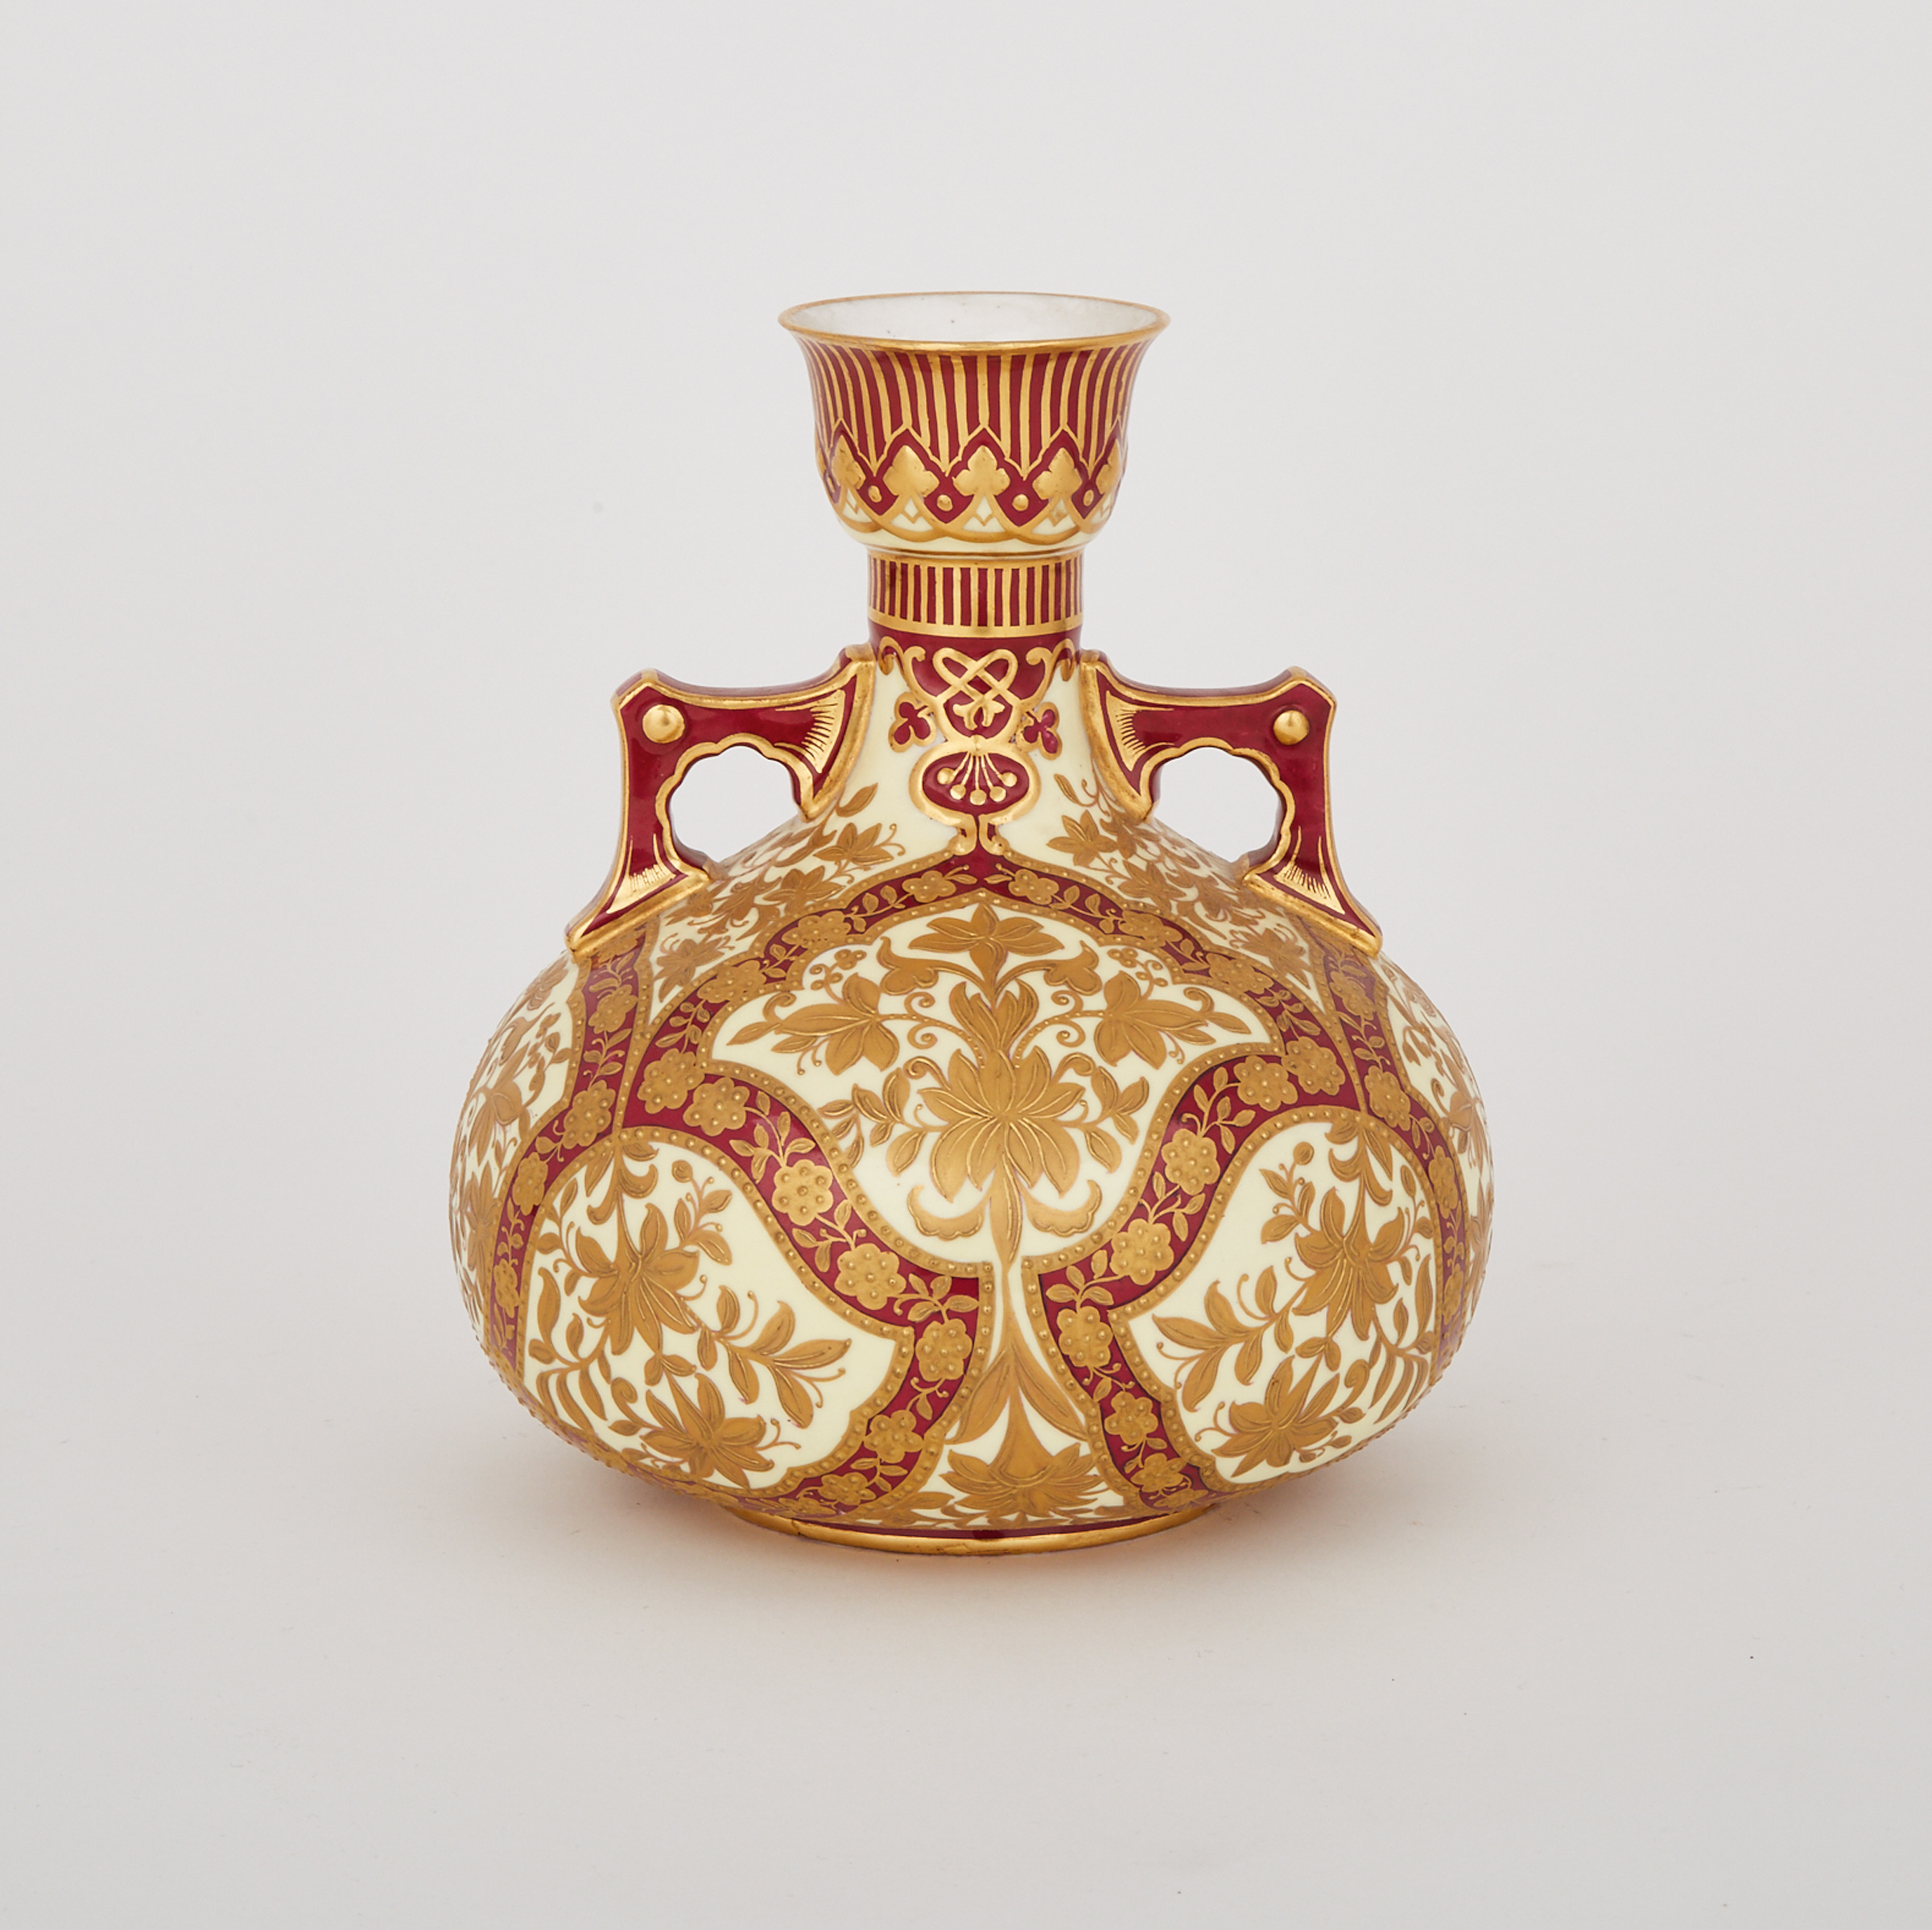 Derby Crown Porcelain Co. Yellow, Claret and Gilt Decorated Two-Handled Vase, 1884